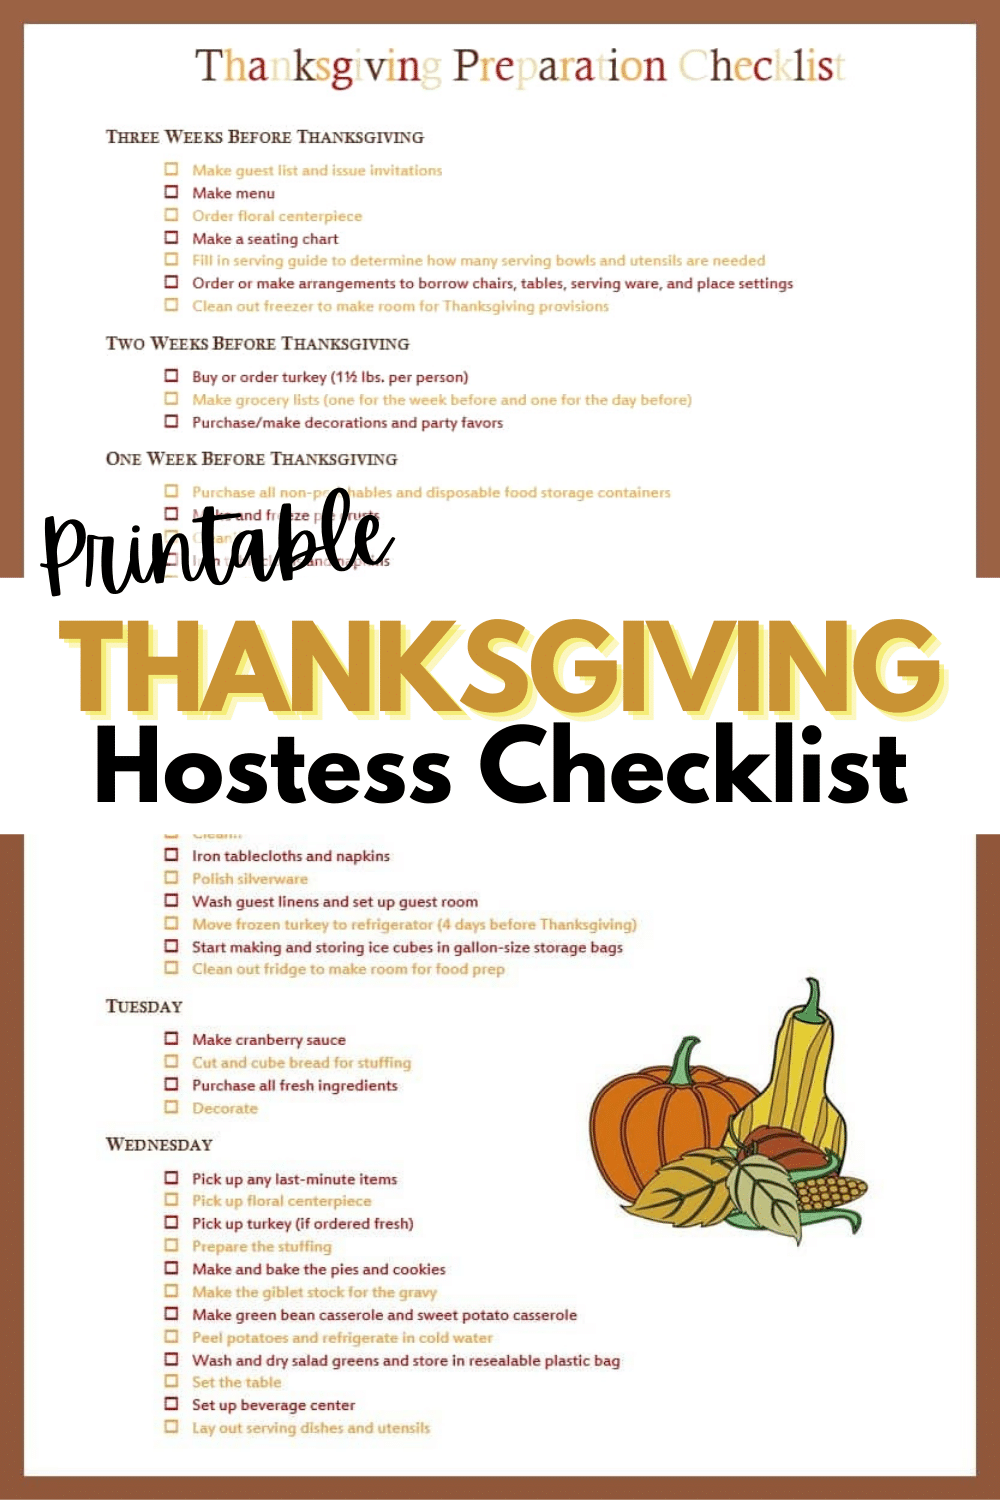 This 3-page Thanksgiving Checklist will help you plan every detail of your holiday feast so that you'll still have time to enjoy your own party. #thanksgiving #thanksgivingdinner #checklist #printable via @wondermomwannab